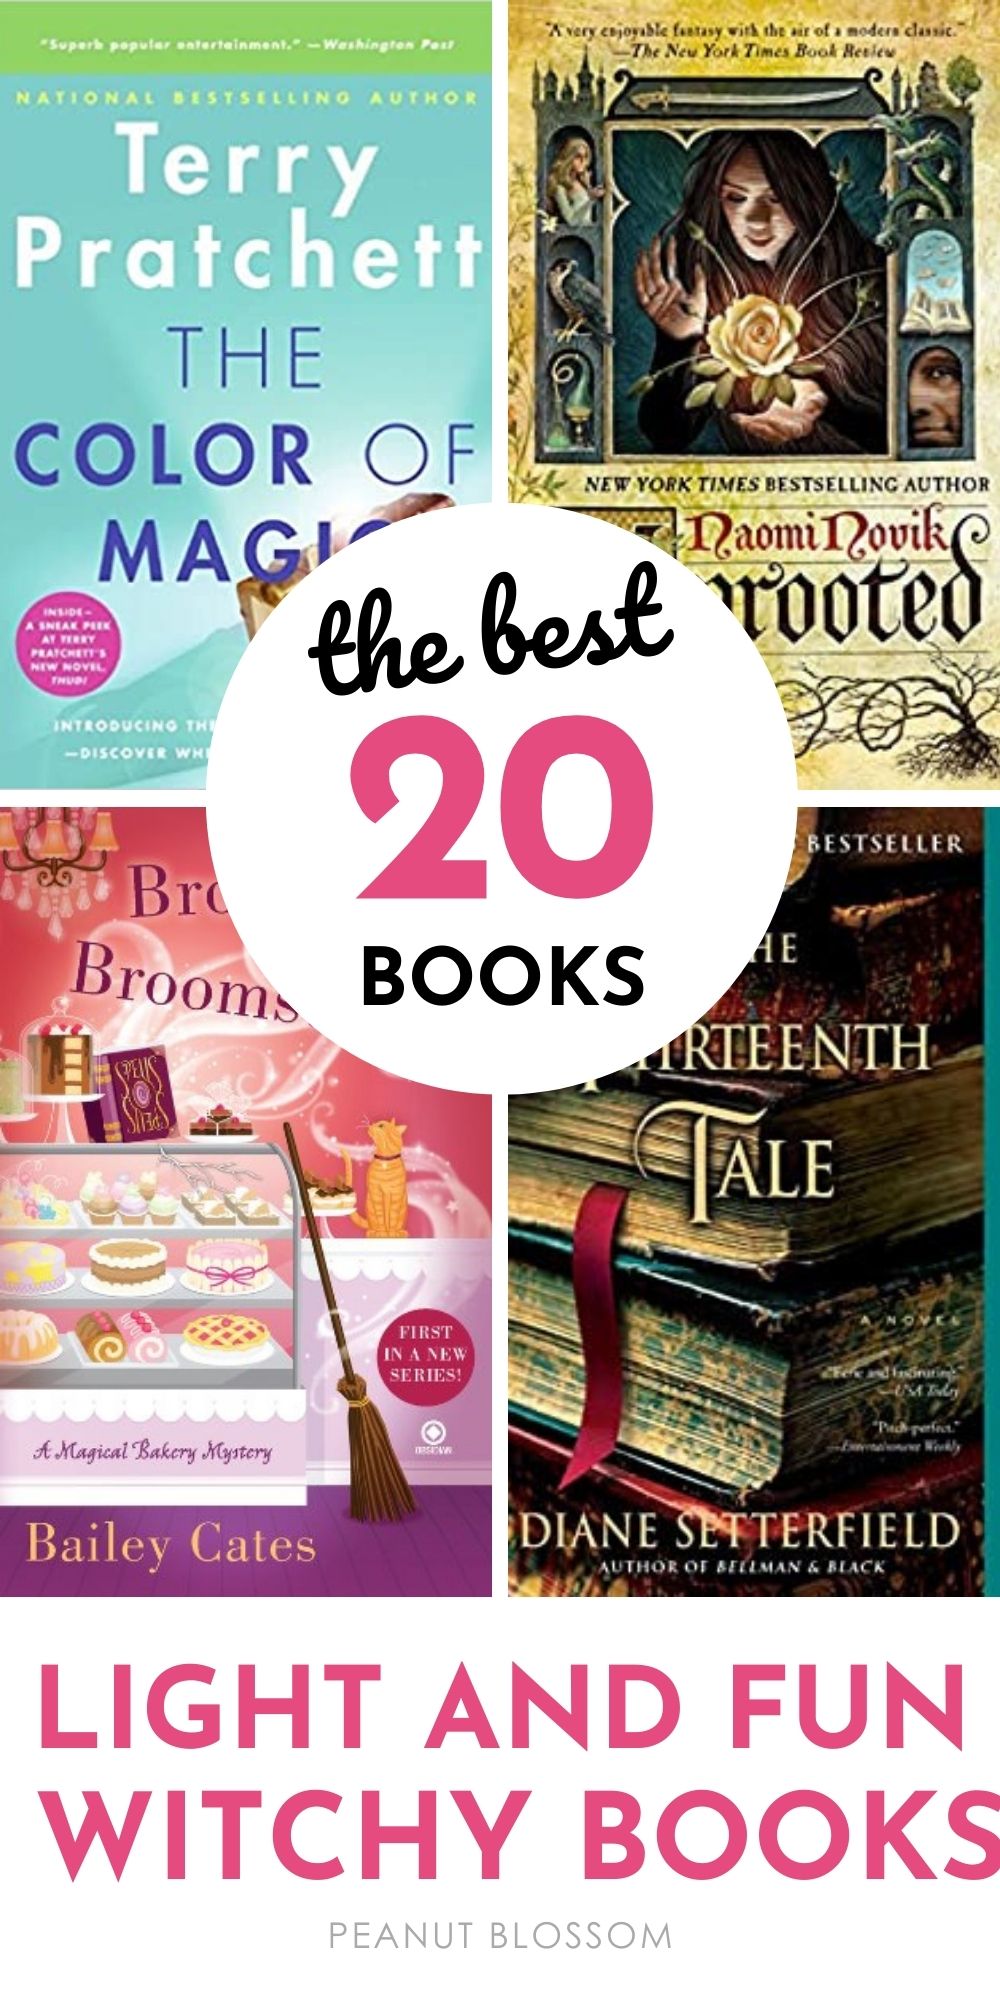 Collage of four book covers - The Color of Magic, Uprooted, Brownies and Broomsticks, and The Thirteenth Tale - with text f The Best 20 Books Light and Fun witchy books.